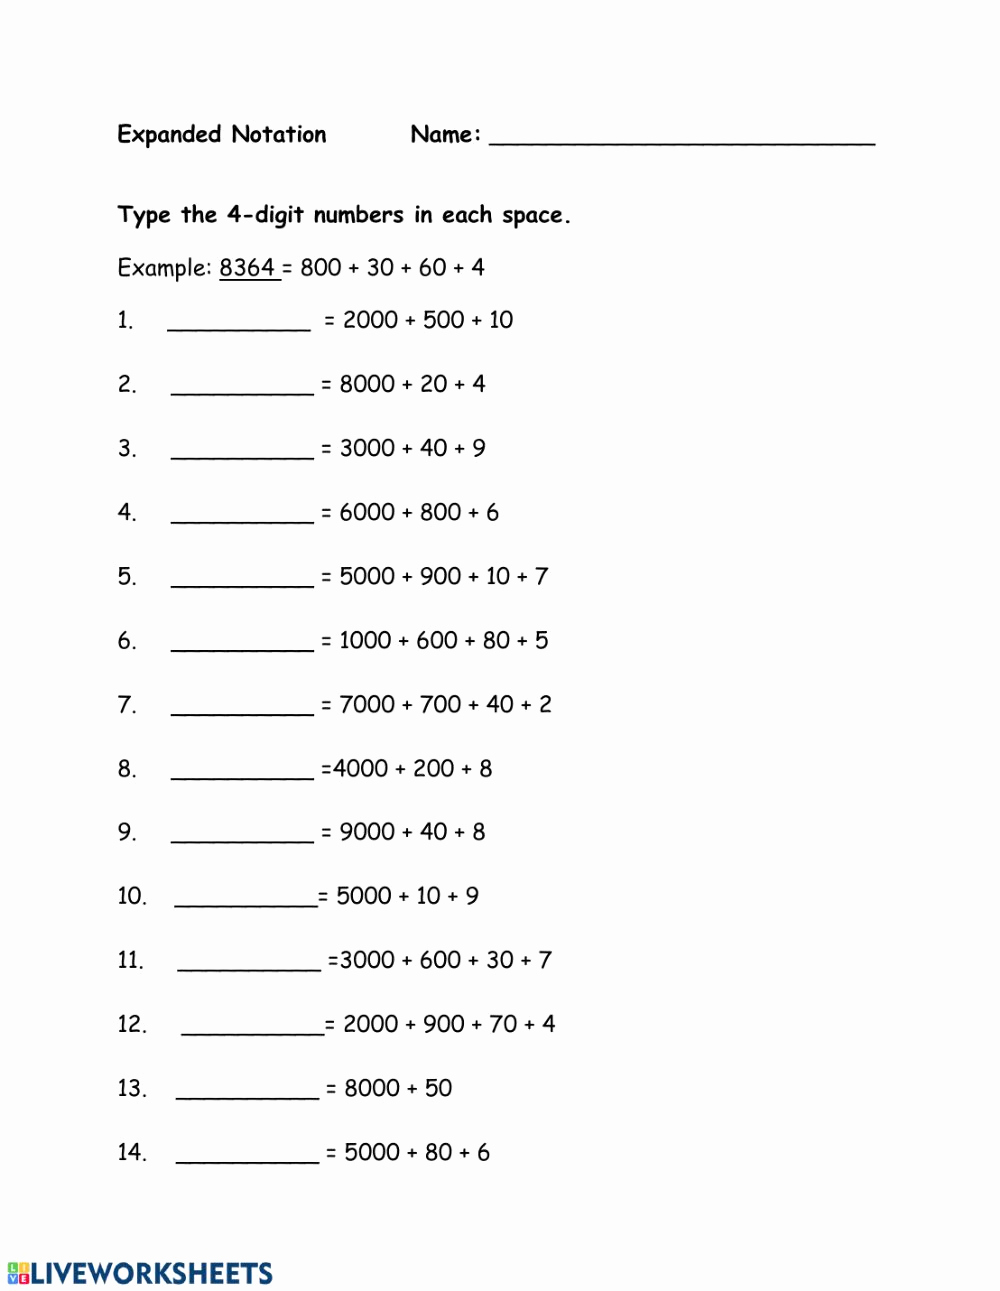 Expanded Notation Worksheets Best Of Numbers and Numeration Worksheets for Grade 4